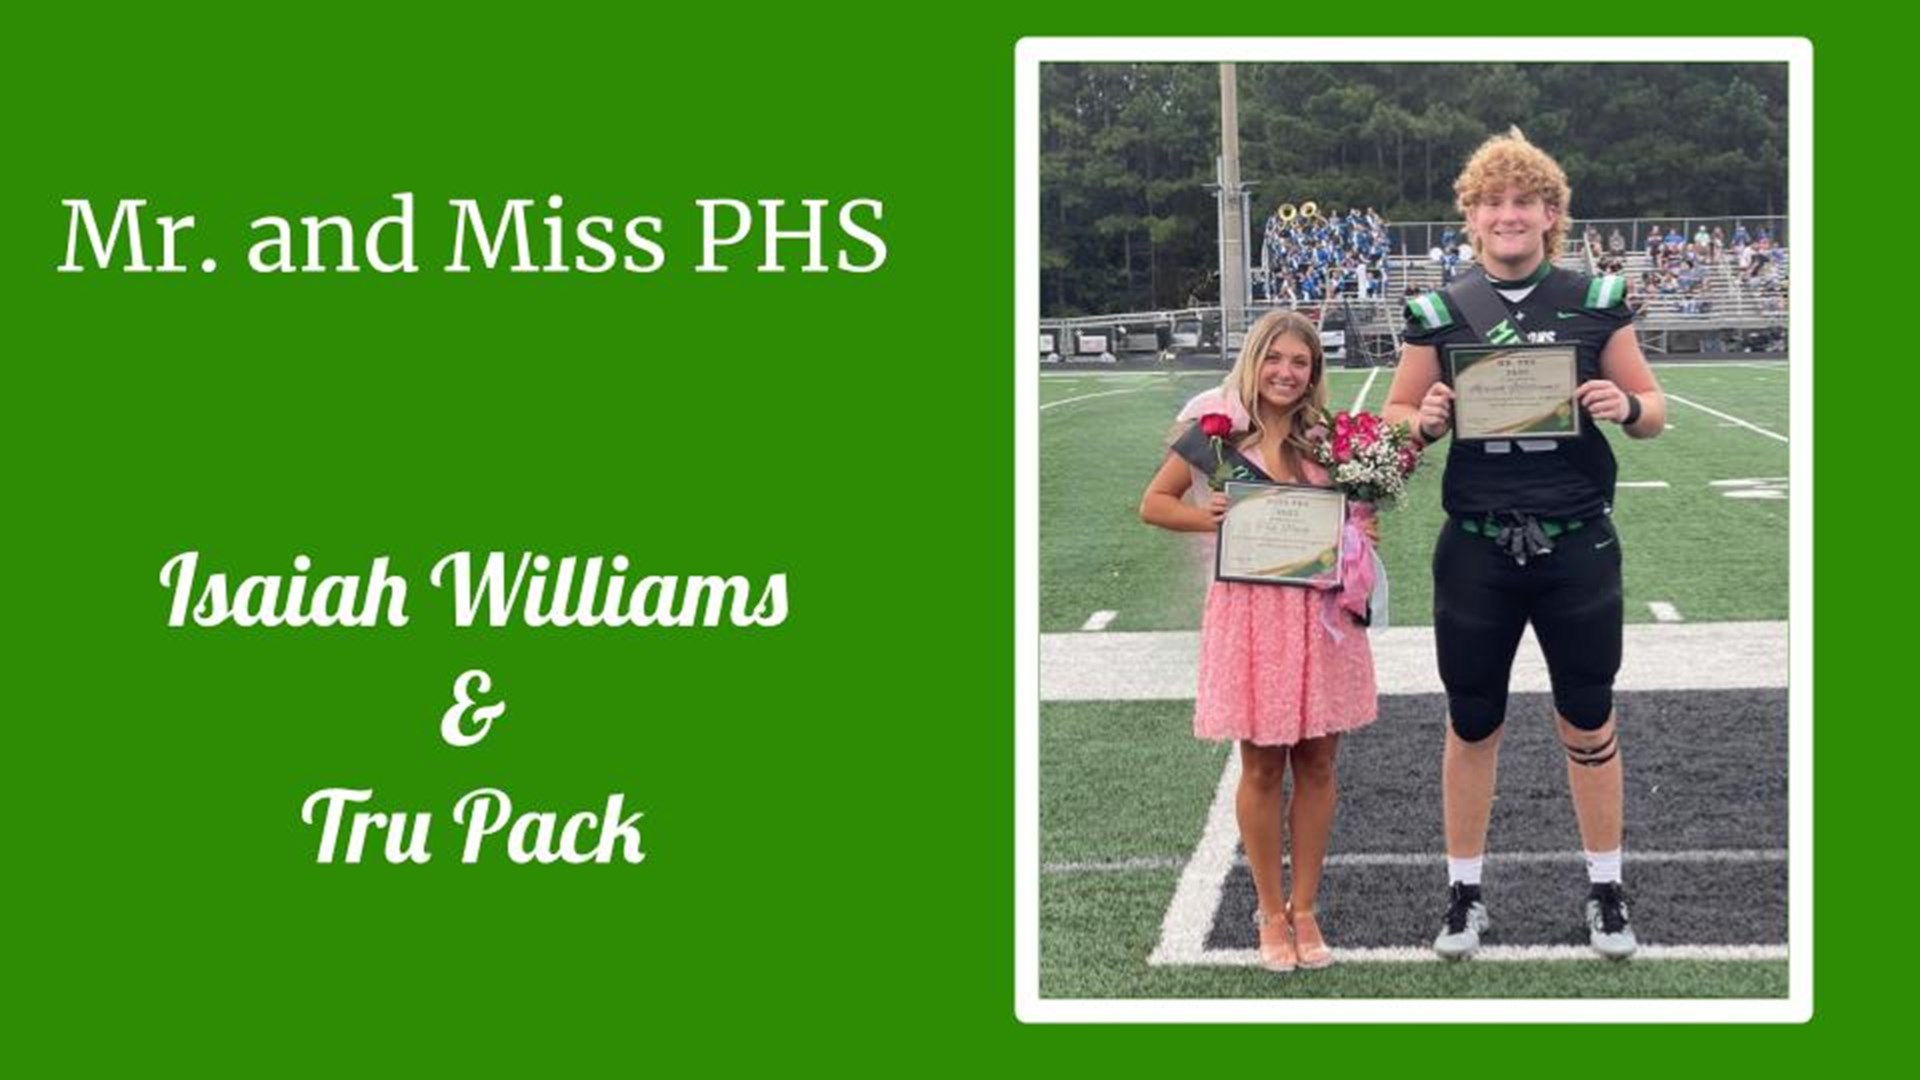 Mr. and Miss PHS